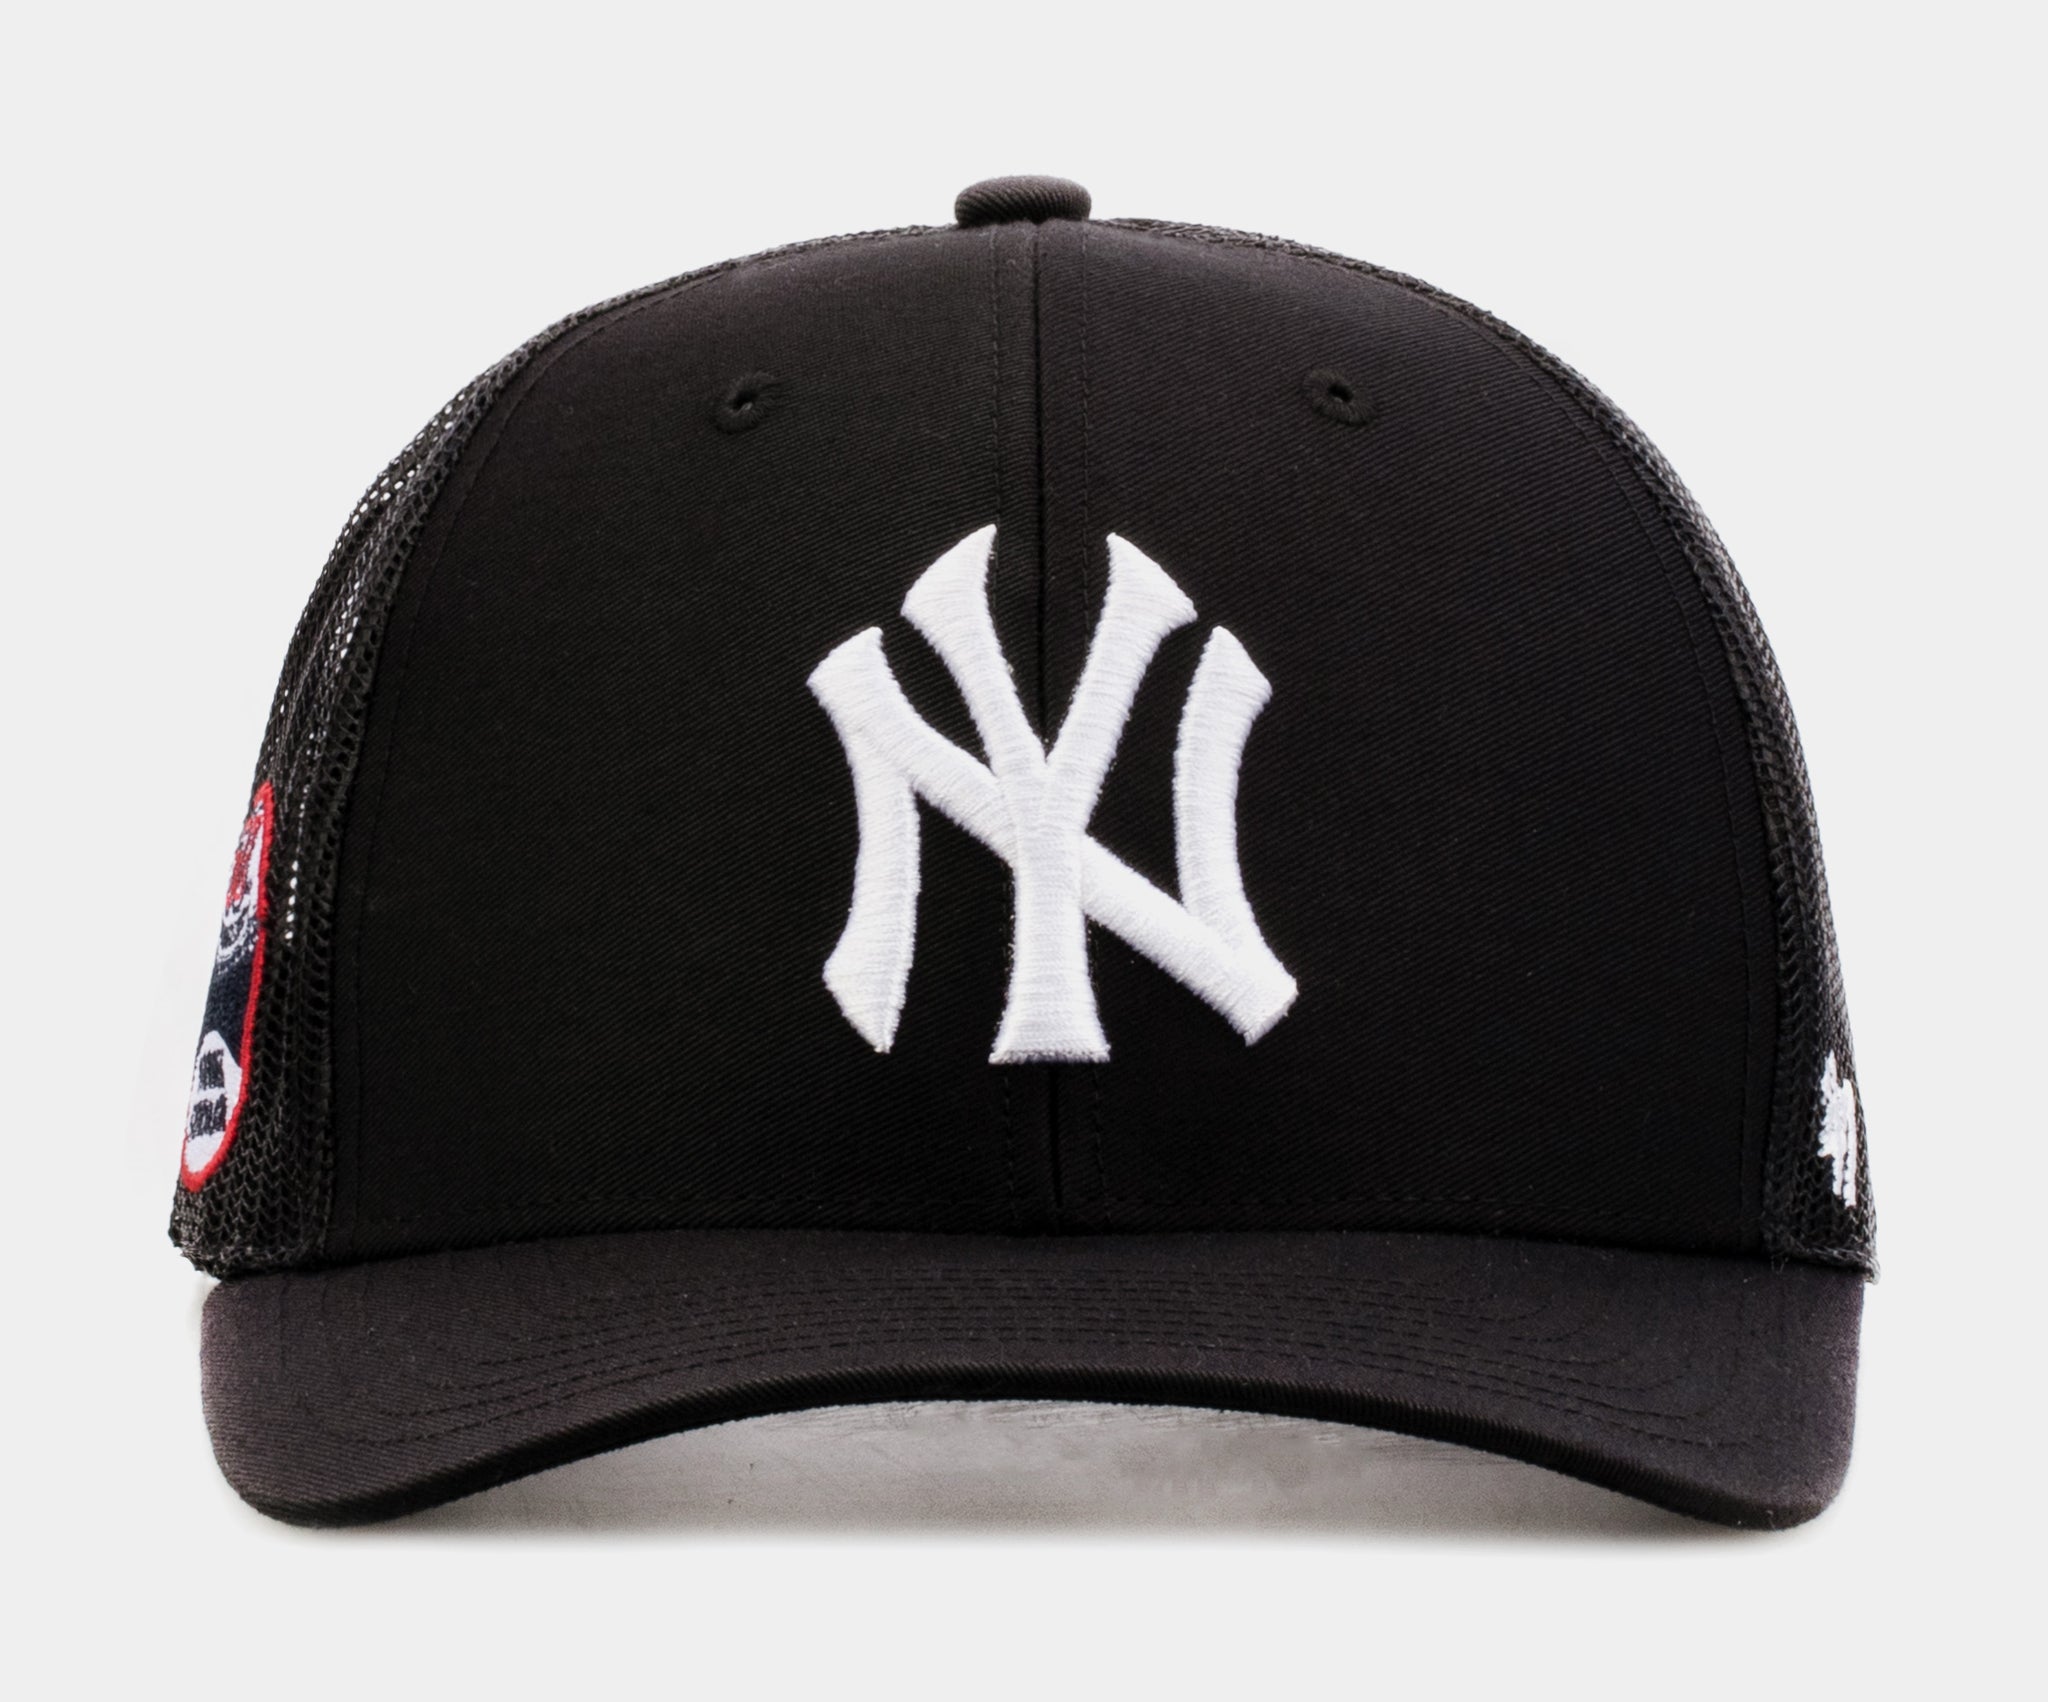 New York Yankees Black Friday Deals, Clearance Yankees Apparel, Discounted  Yankees Gear